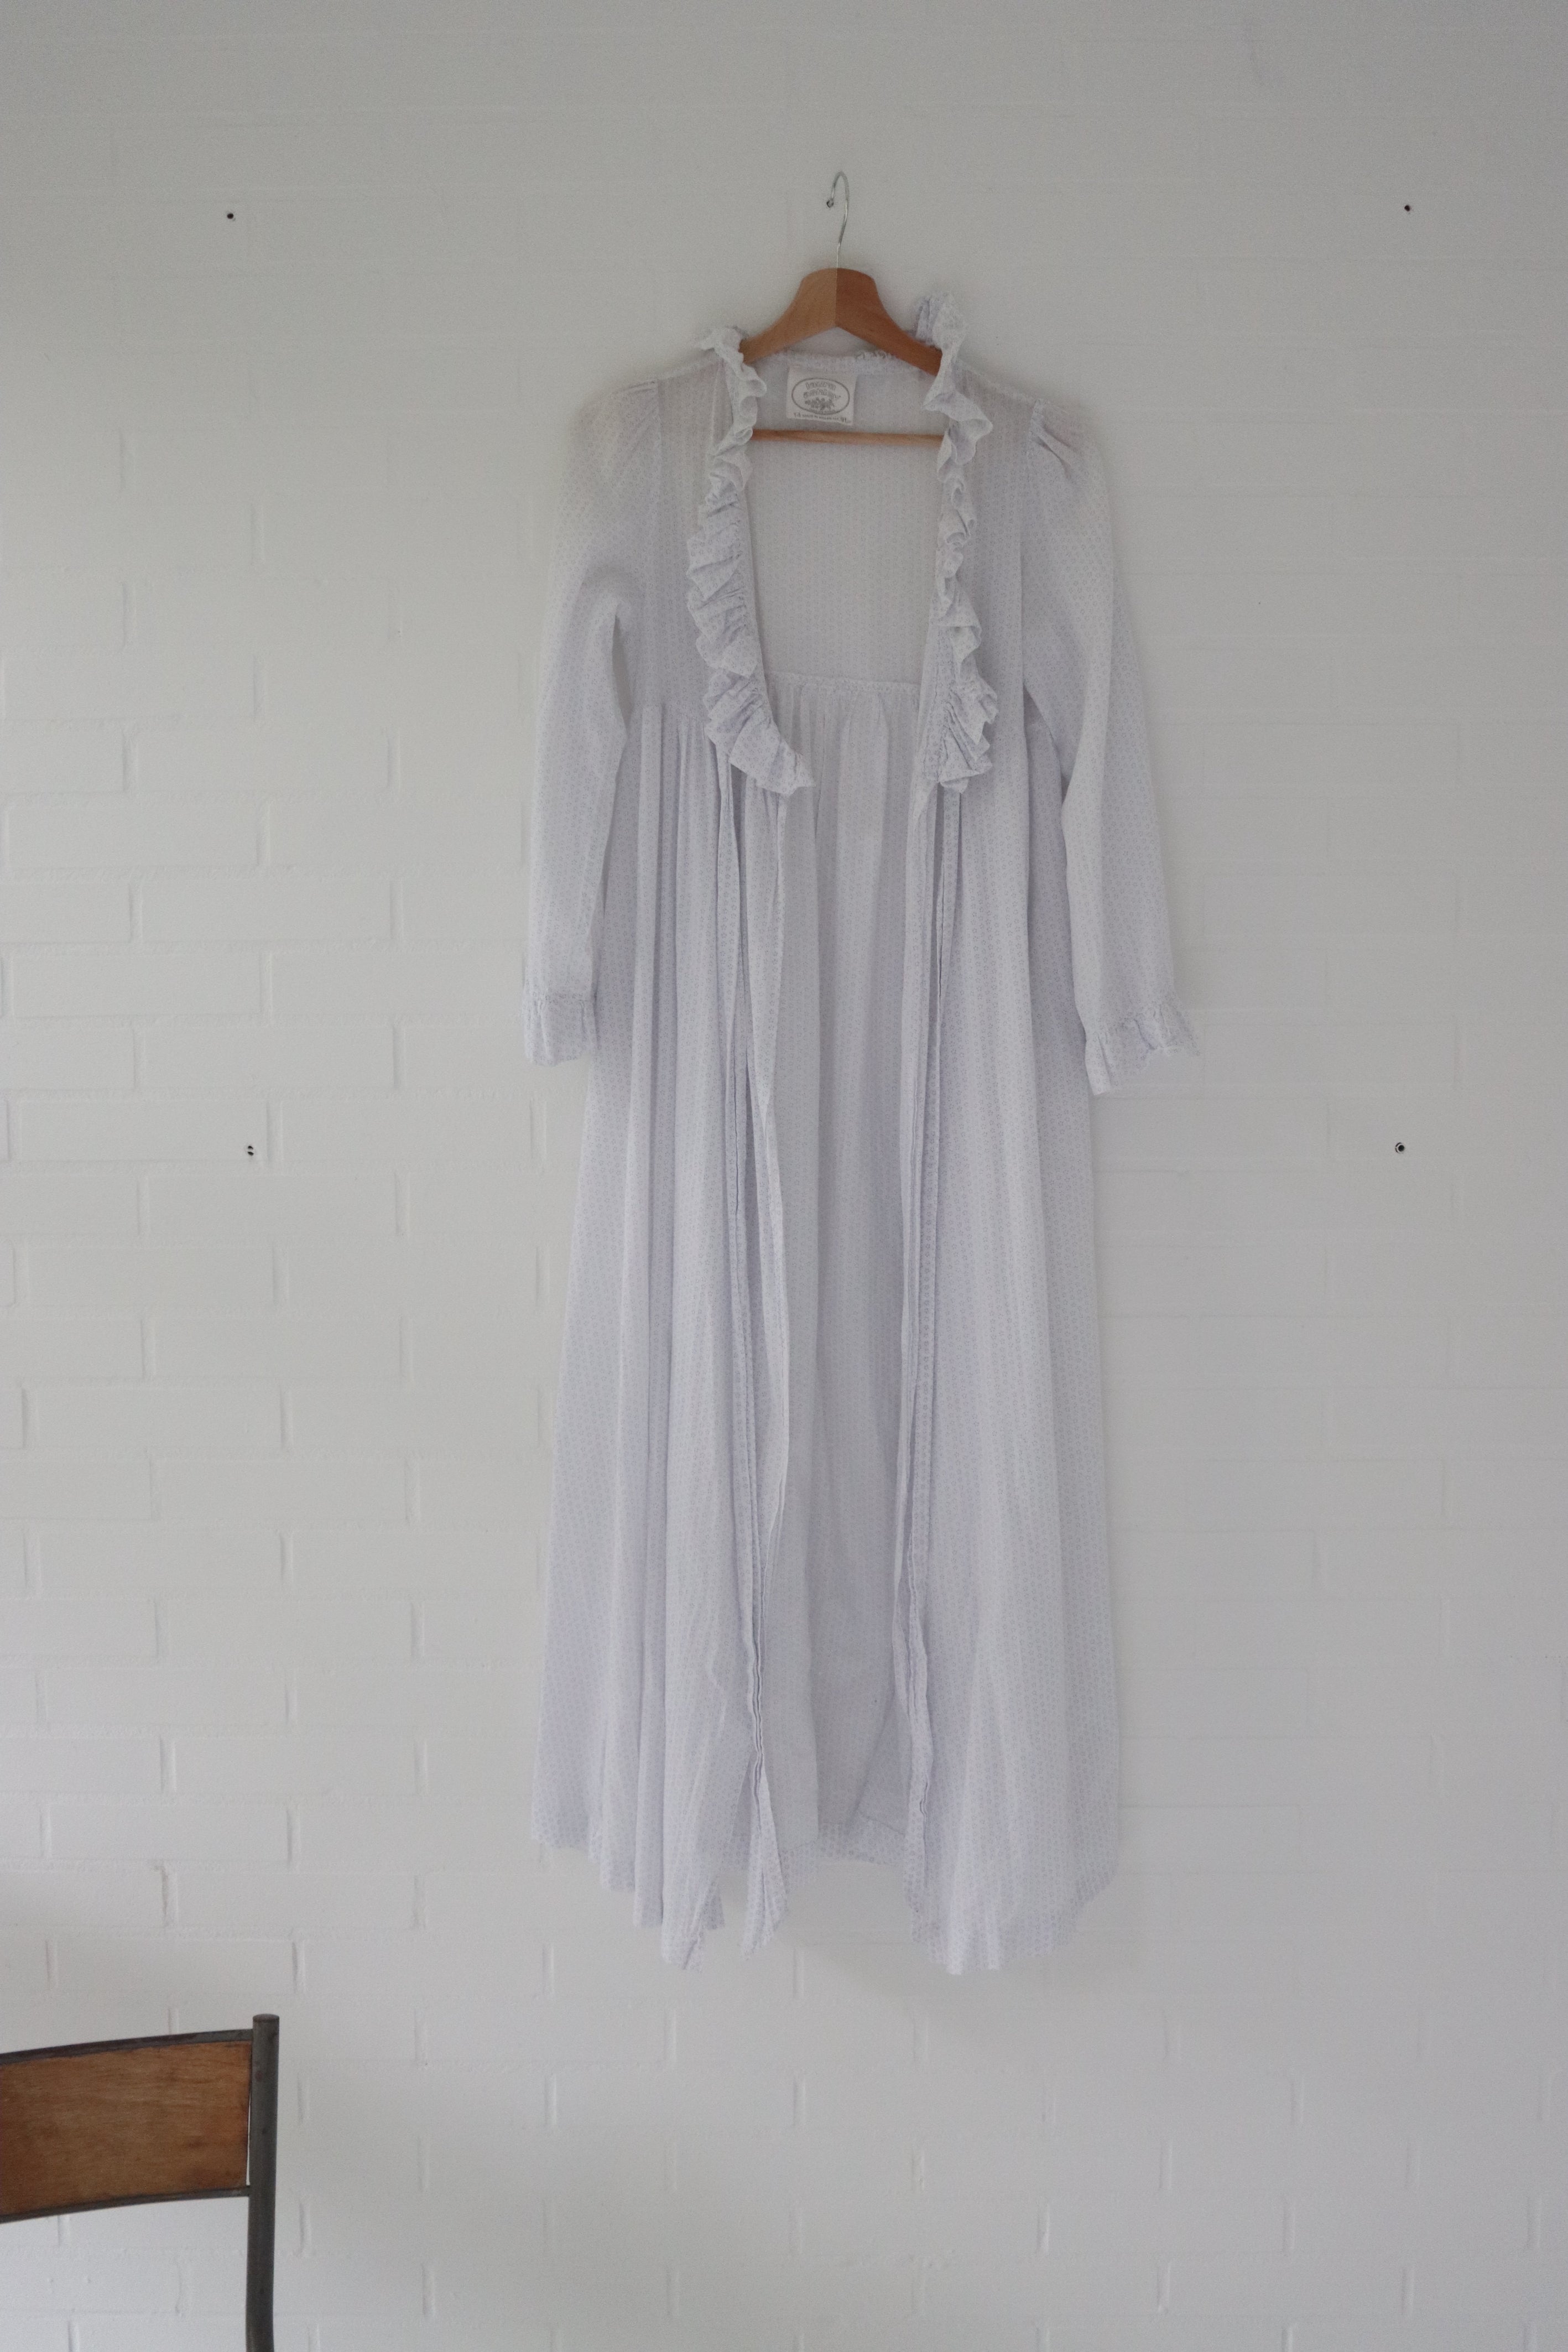 Vintage 70's Laura Ashley romantic cotton duster / robe - Size Small - made in Wales